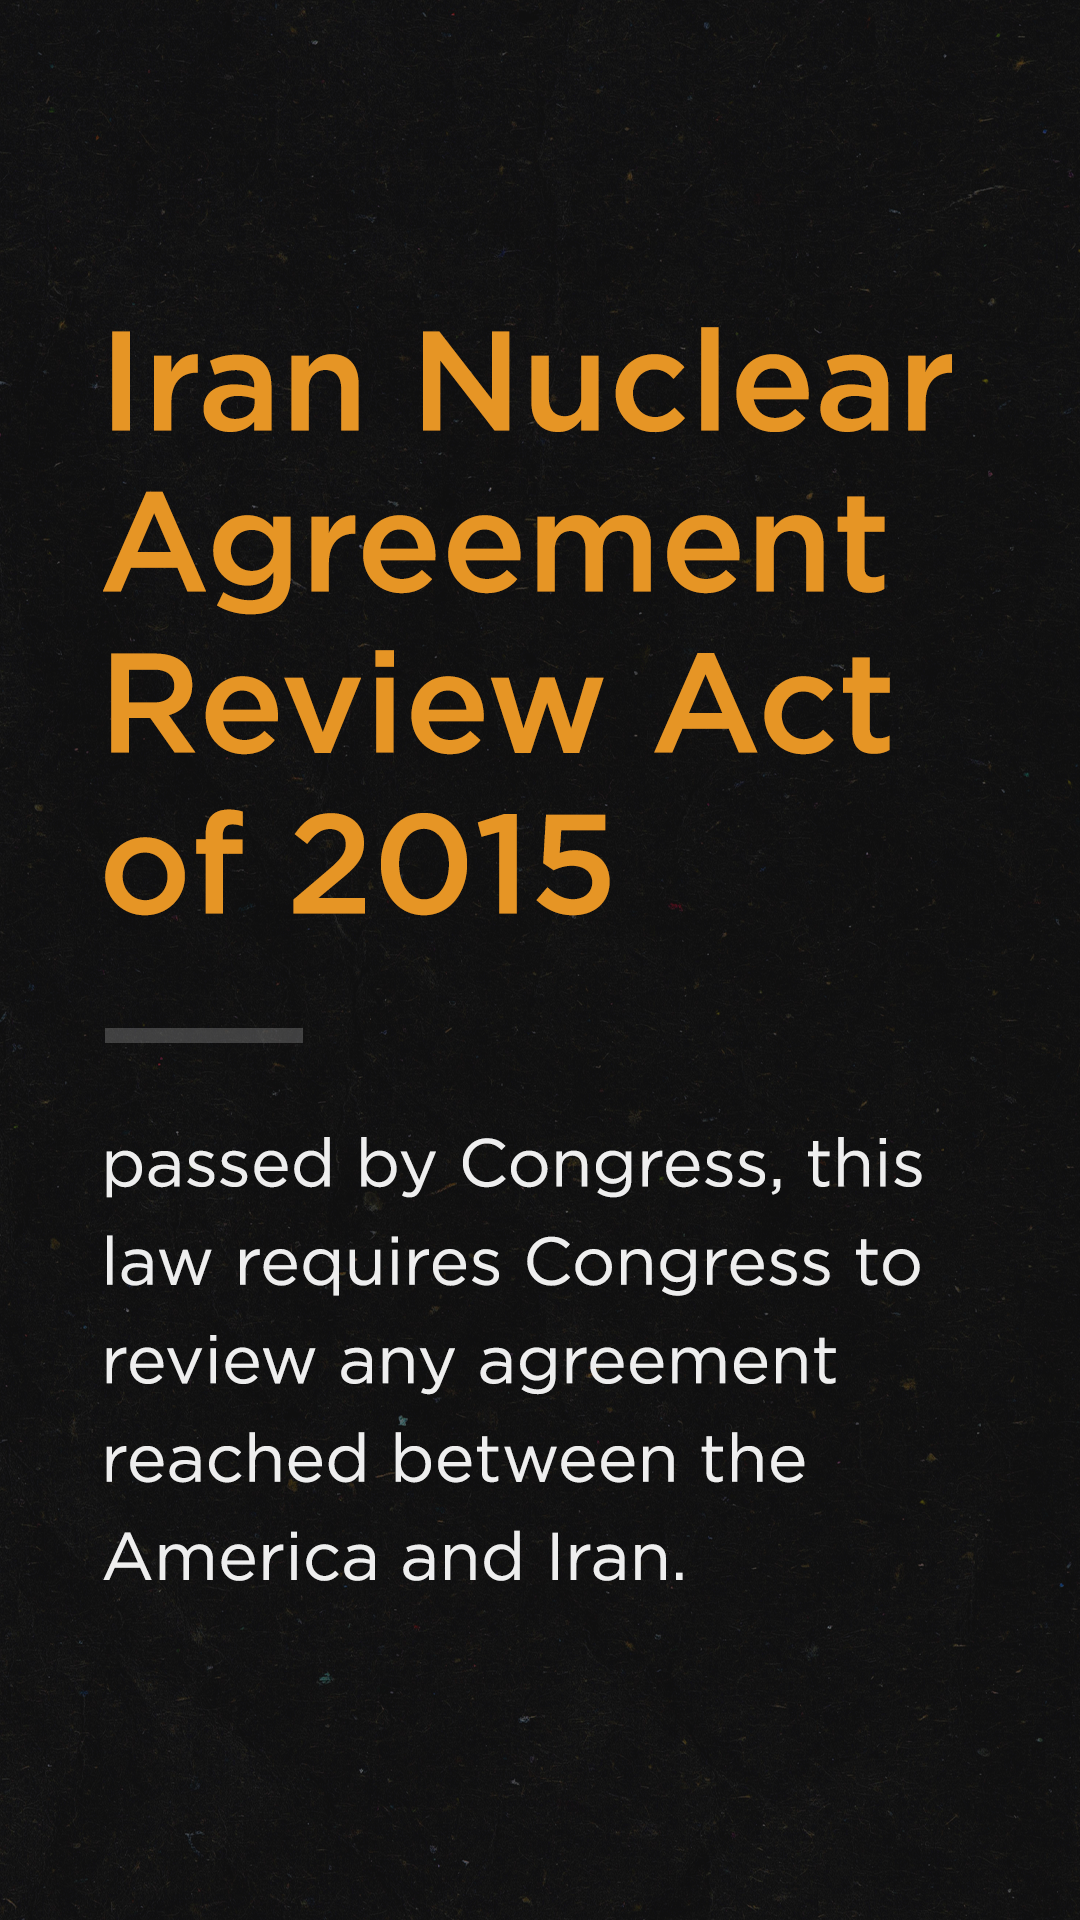 Iran Nuclear Agreement Review Act of 2015 - Passed by Congress, this law requires Congress to review any agreement reached between the America and Iran.